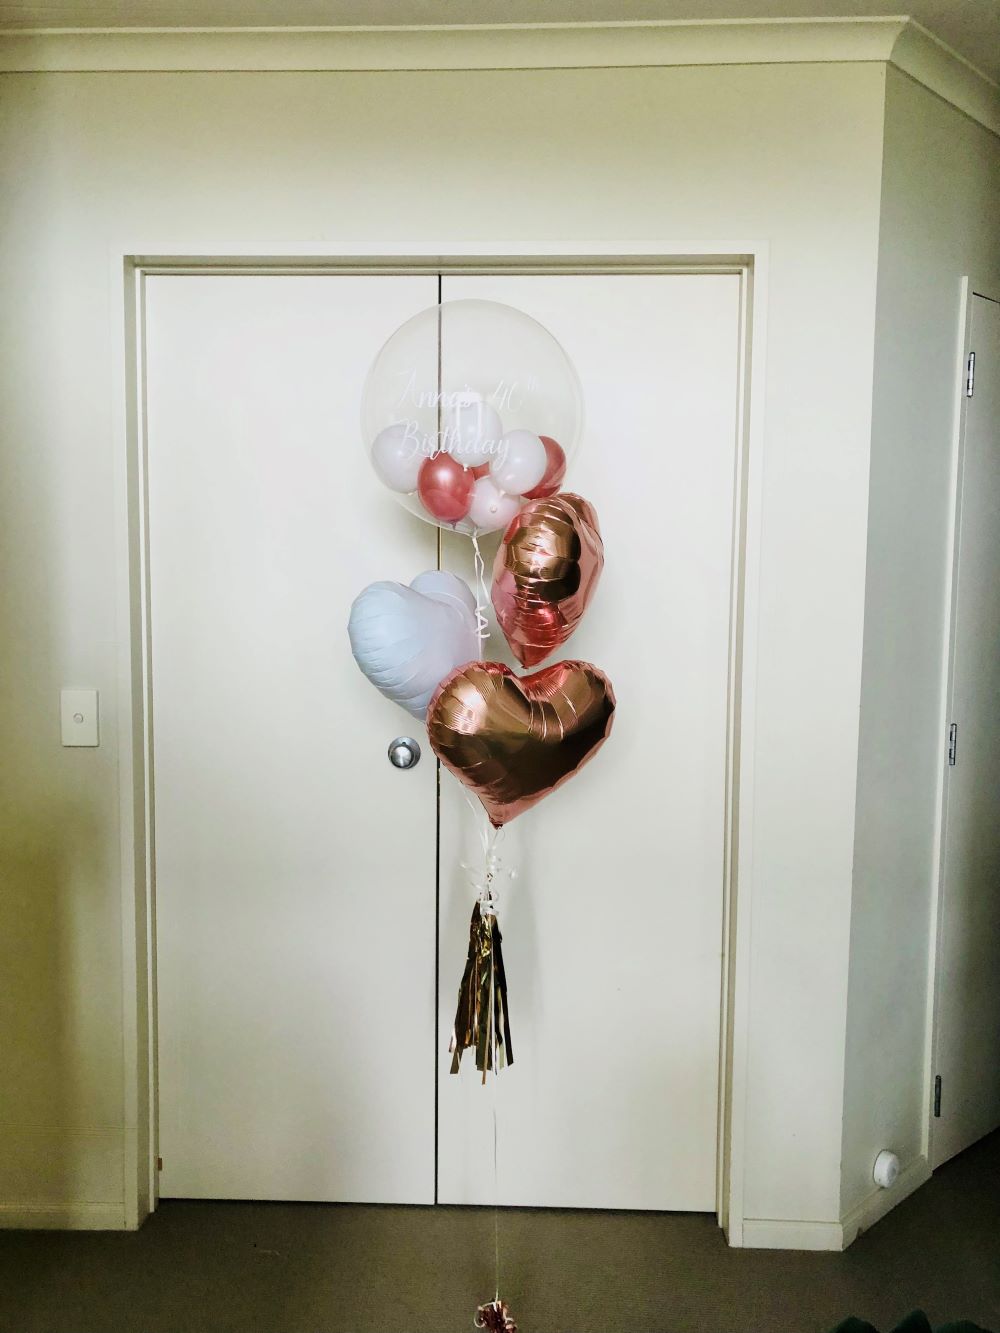 My Party Box Bubble Gum Balloon Bouquet with one bubble balloon with mini latex balloon inside and two metallic Rose Gold foil heart balloon, one White foil heart balloon 